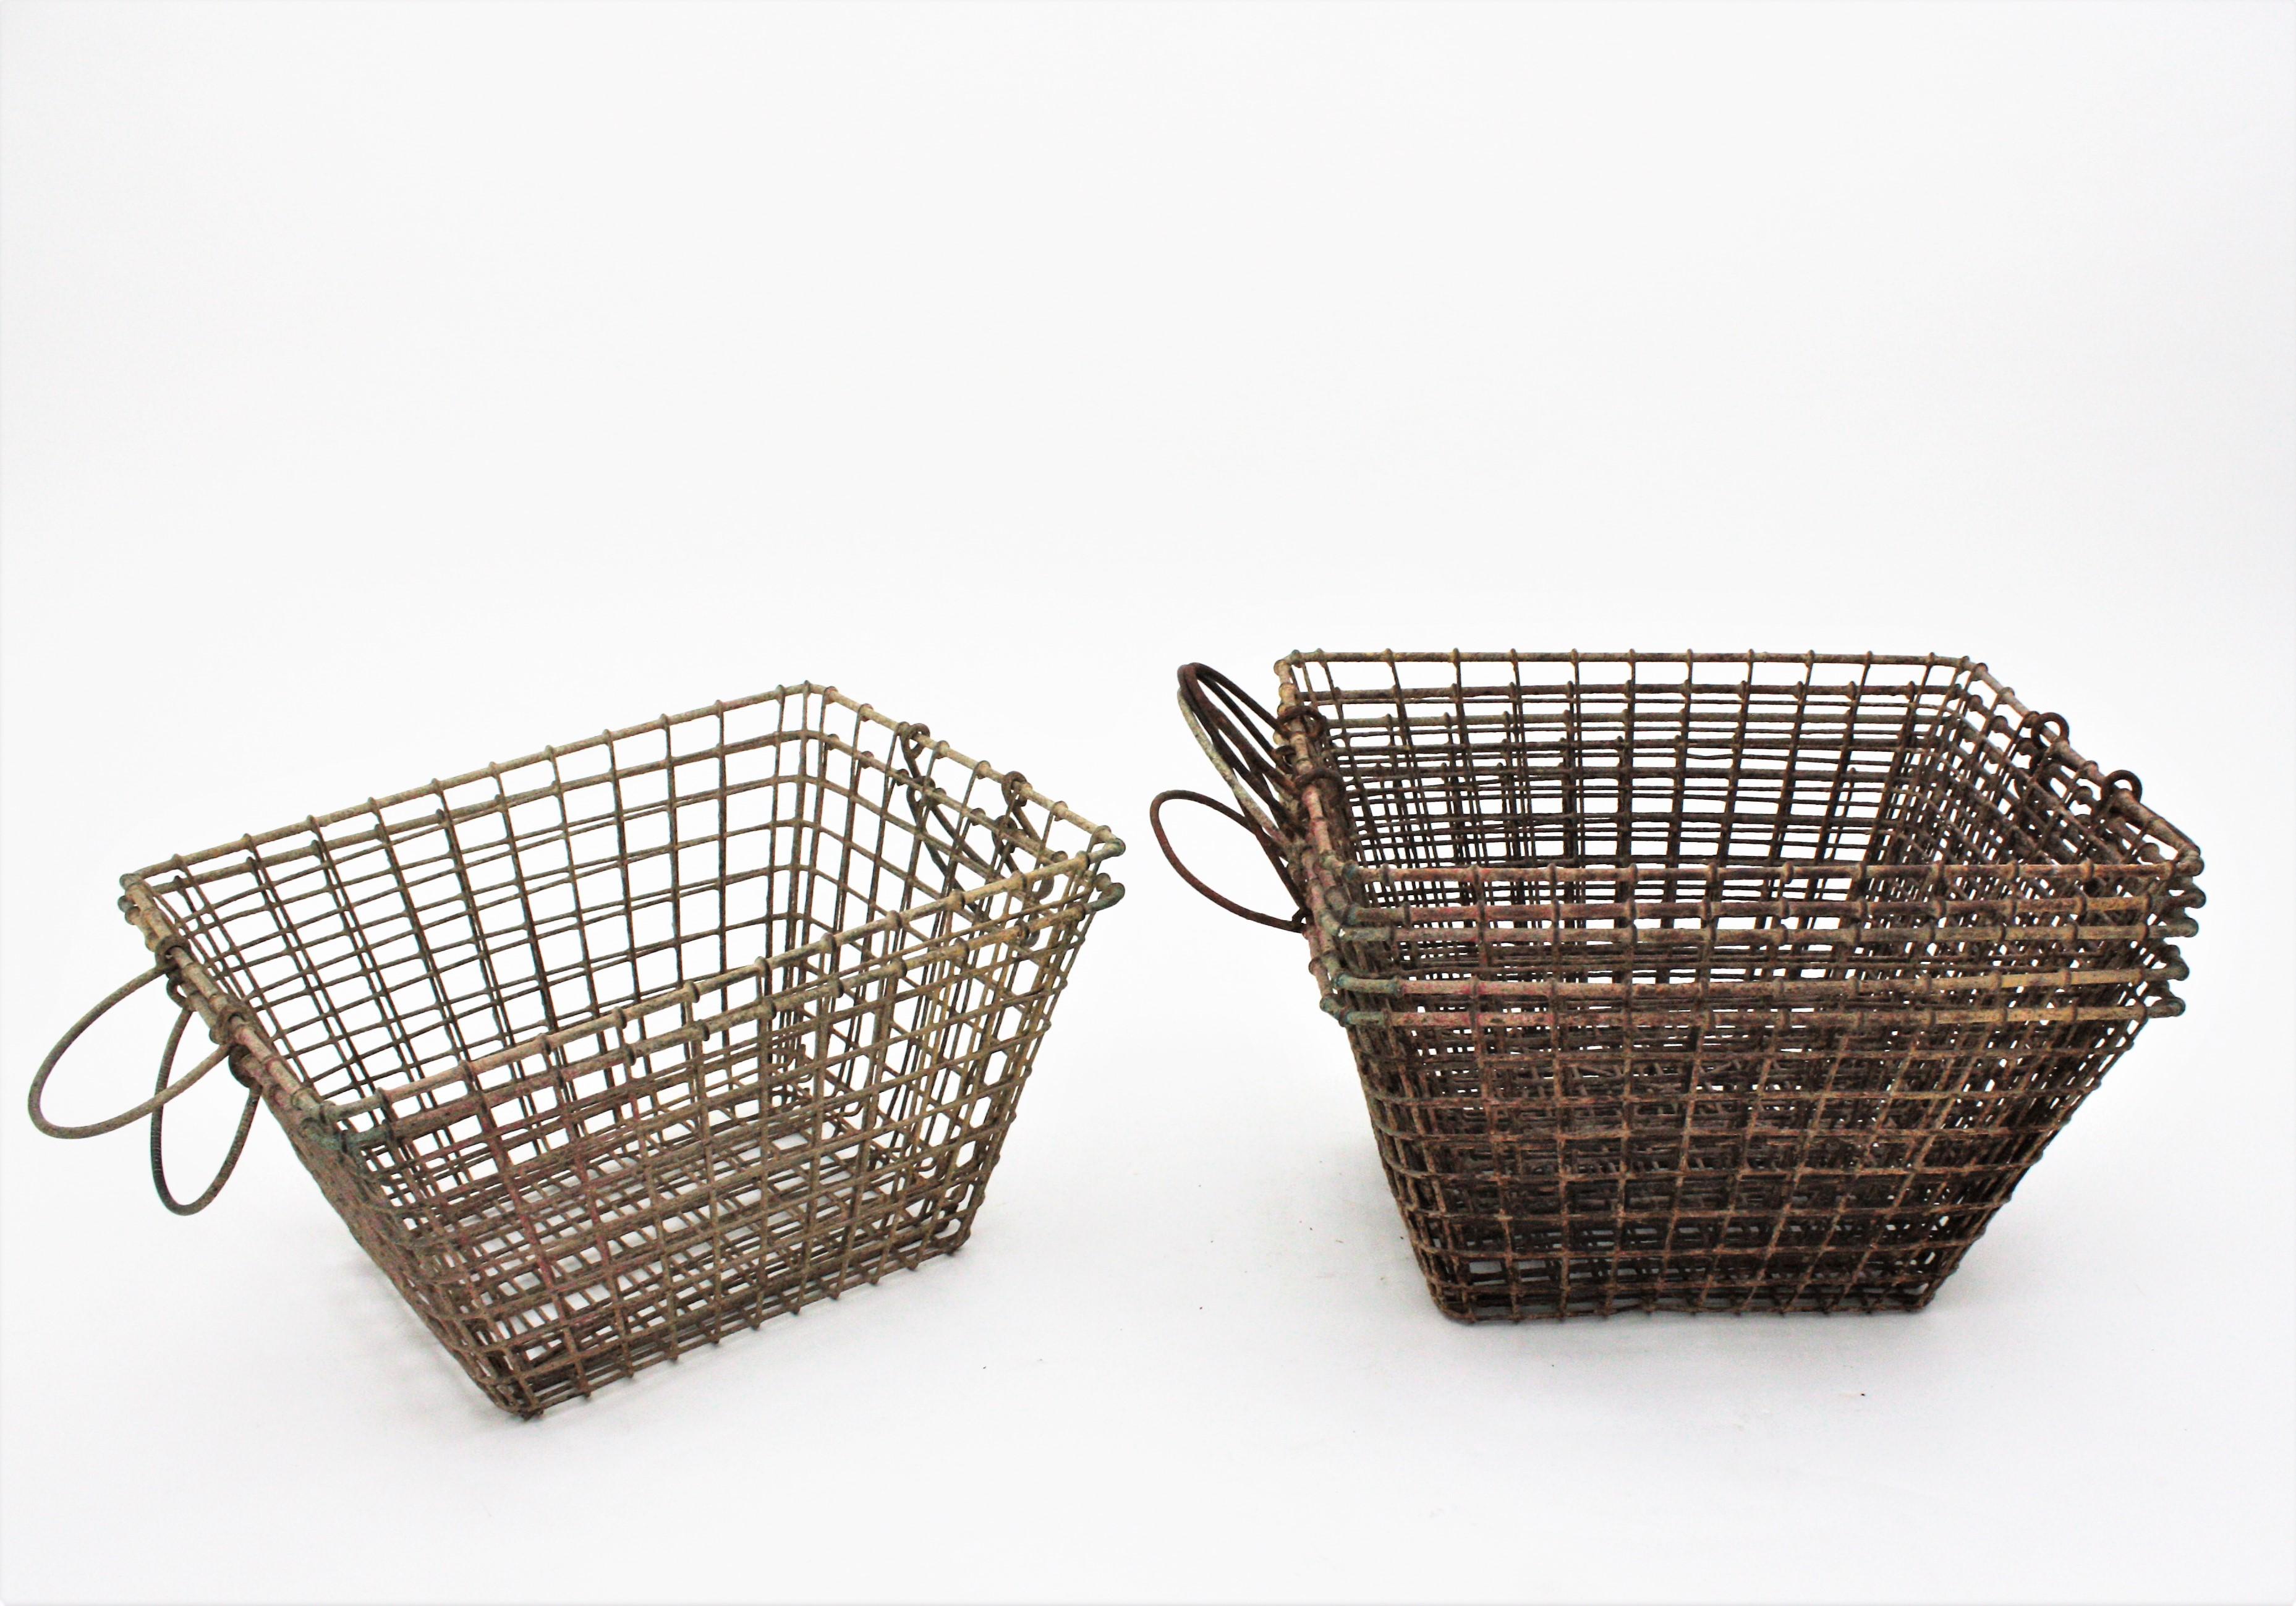 Set of Seven Vintage Metal Wire Coquillage baskets, France, 1960s.
Traditional metal baskets used by french oyster farmers at low tide for harvest. 
Very good vintage condition and terrific aged patina.
Interesting for Storage or decorative